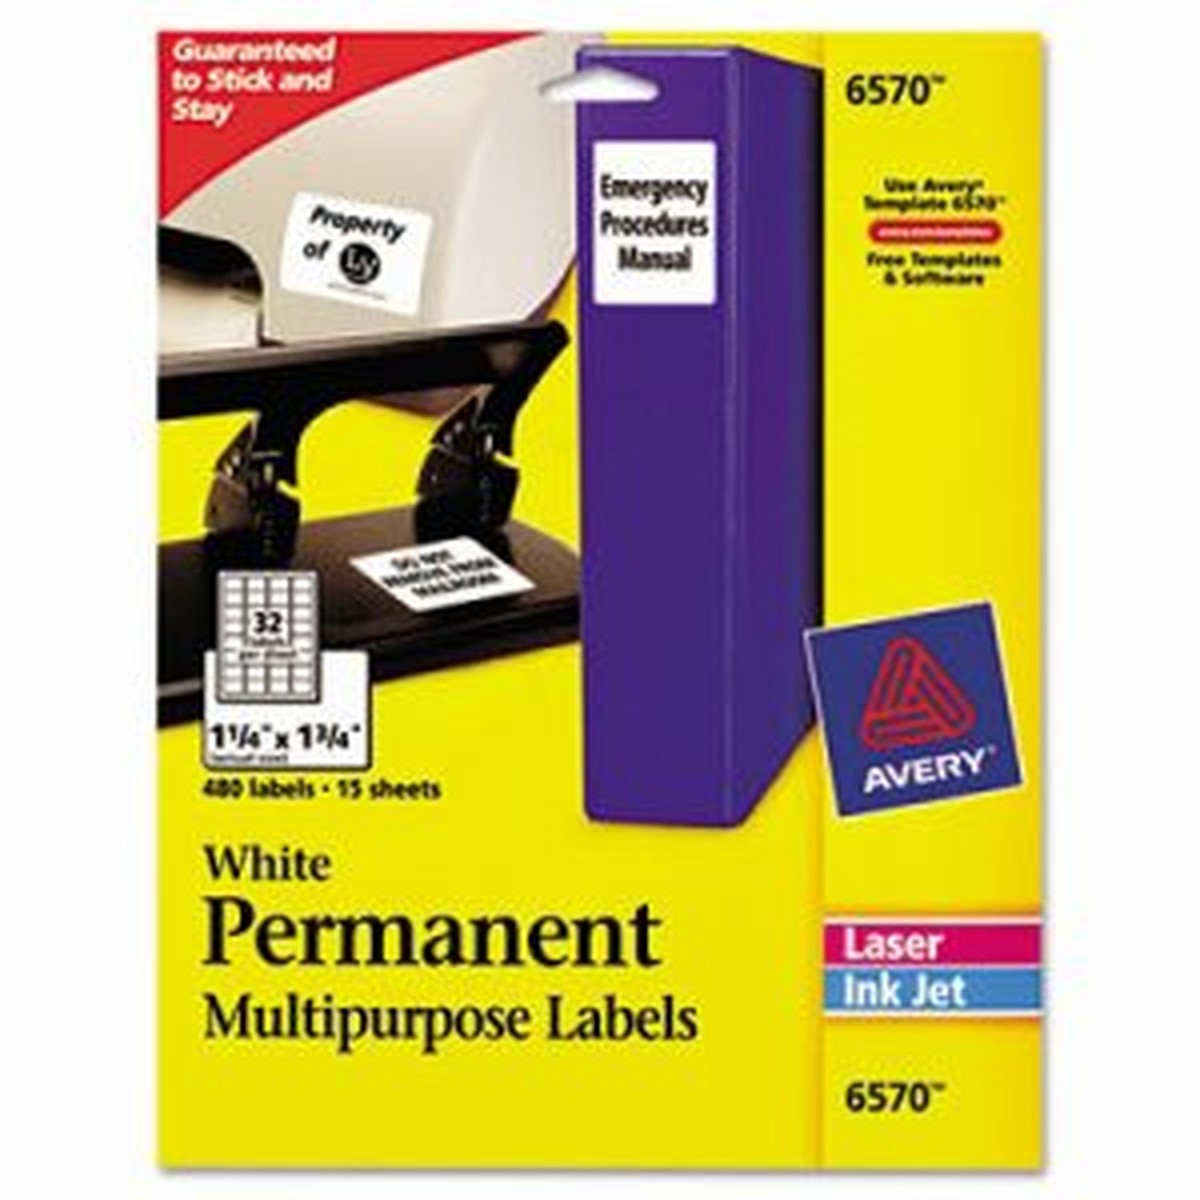 Permanent ID Labels, Inkjet/Laser, 1 1/4 x 1 3/4, White, 480/Pack